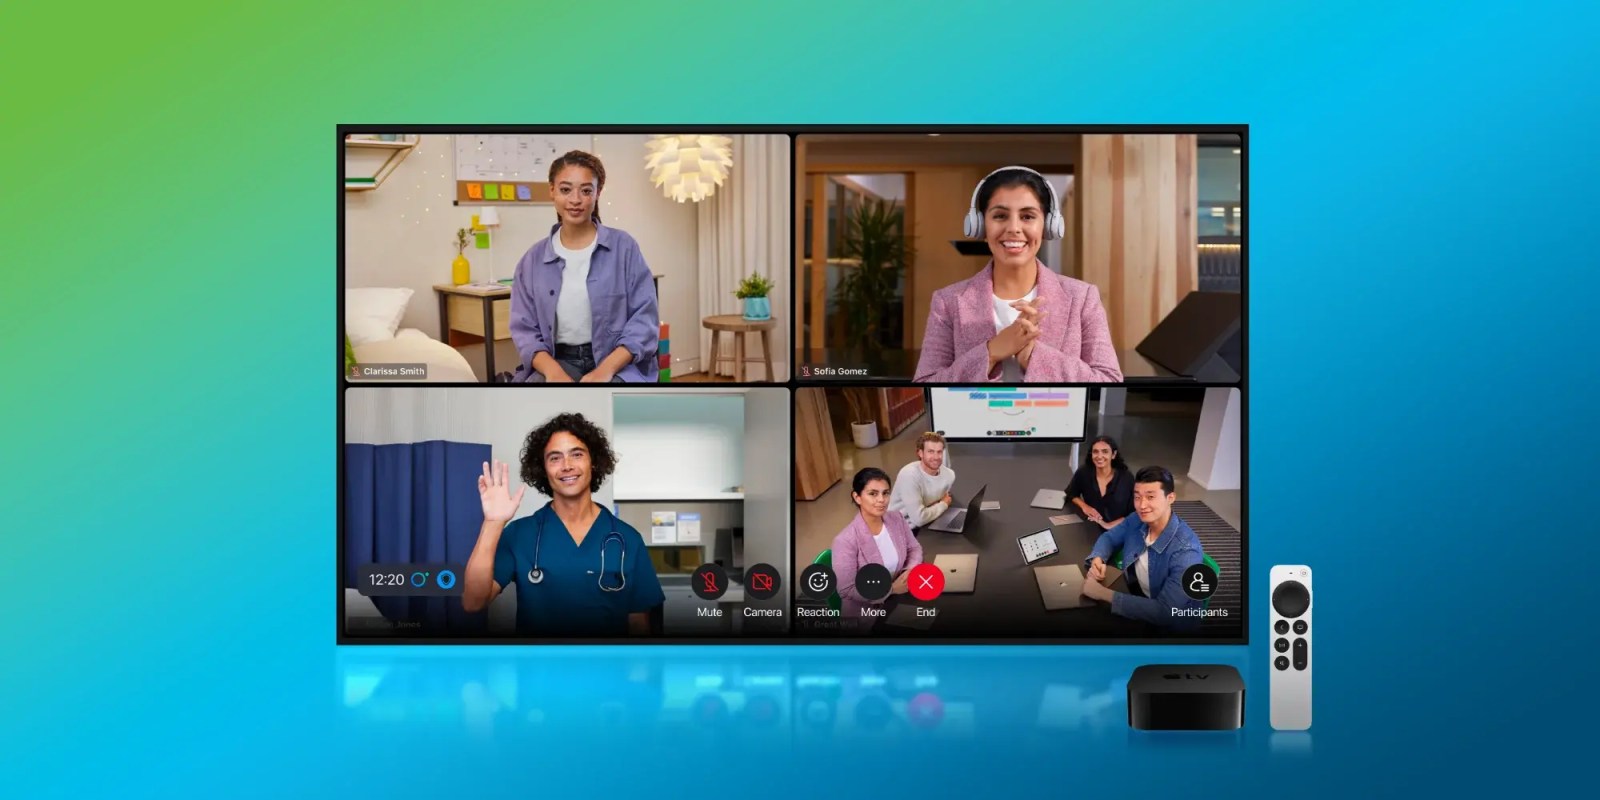 Webex Meetings expanding with Apple TV 4K and Apple Watch support – 9to5Mac